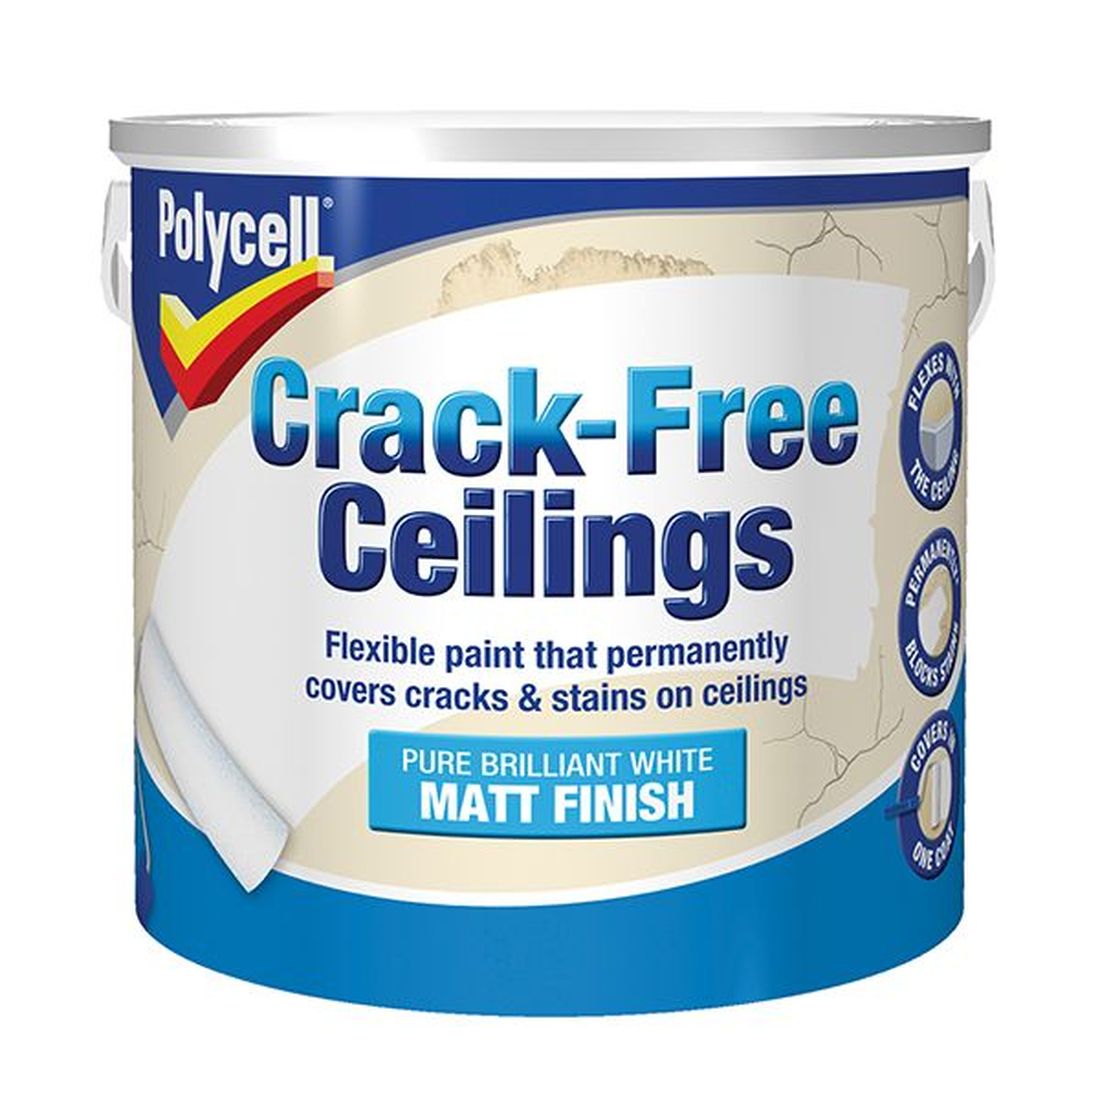 Polycell Crack-Free Ceilings Smooth Matt 2.5 litre                                       